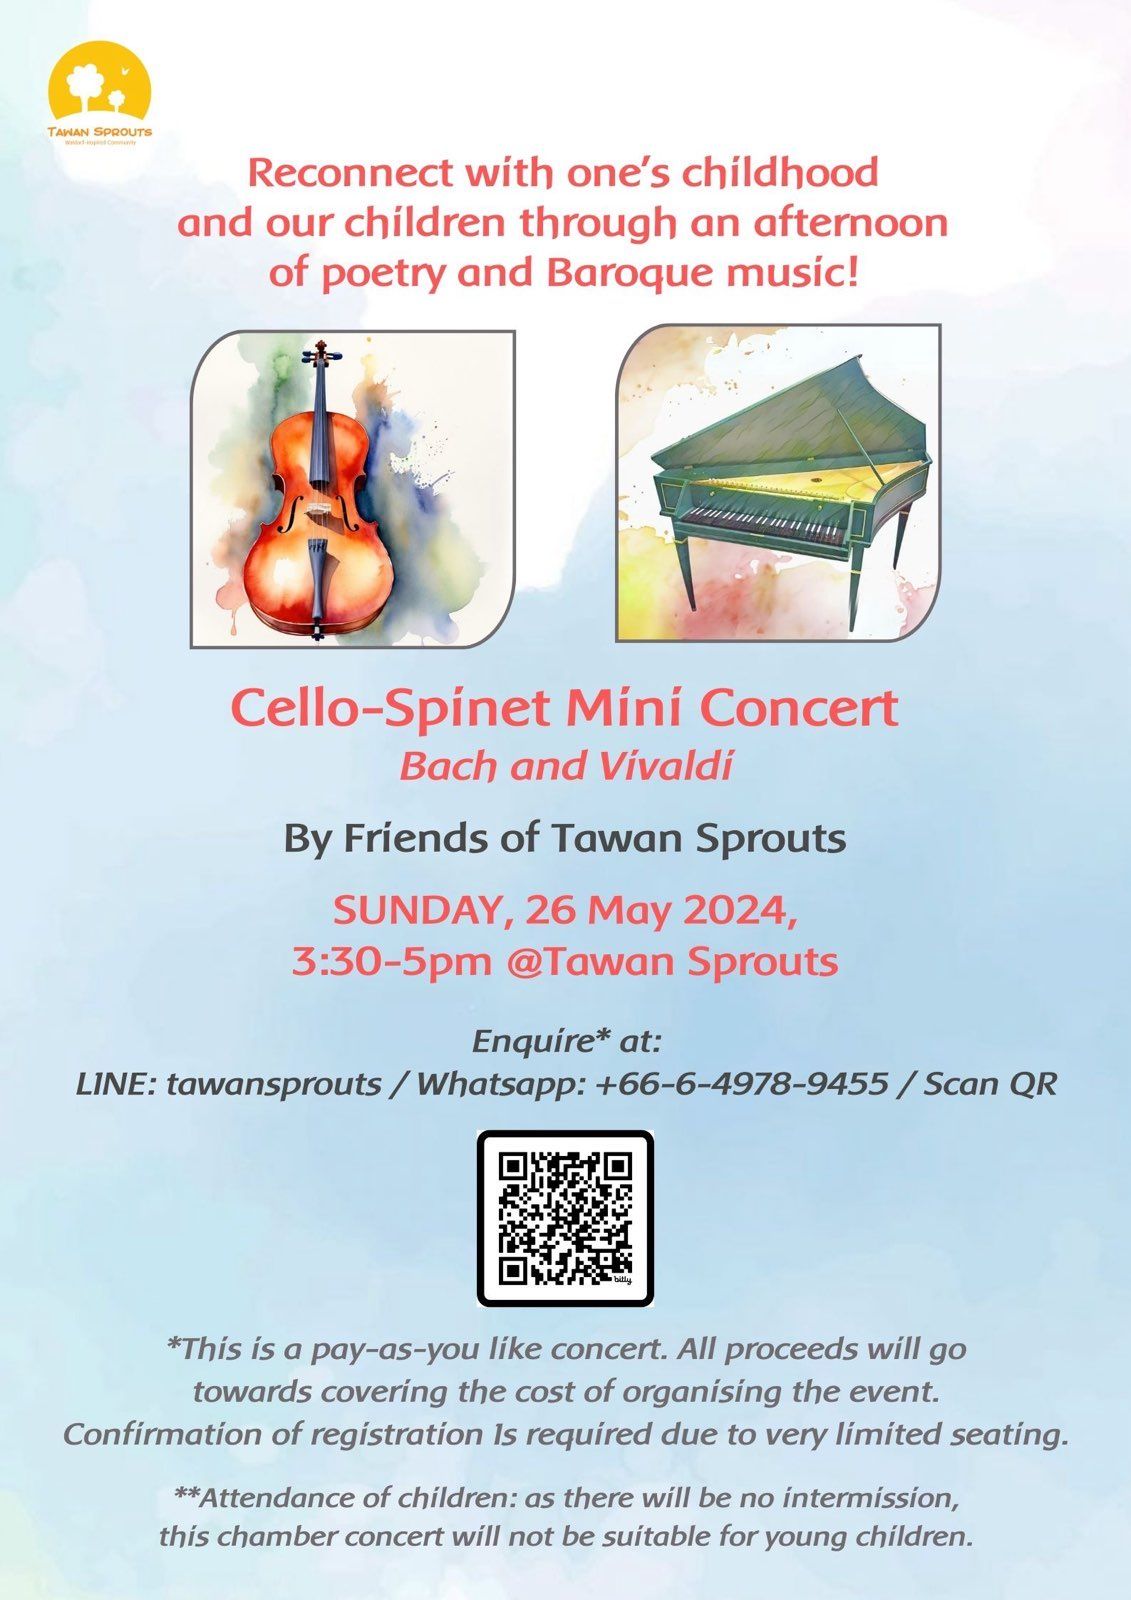 Cello-Spinet Mini Concert by Friends of Tawan Sprouts